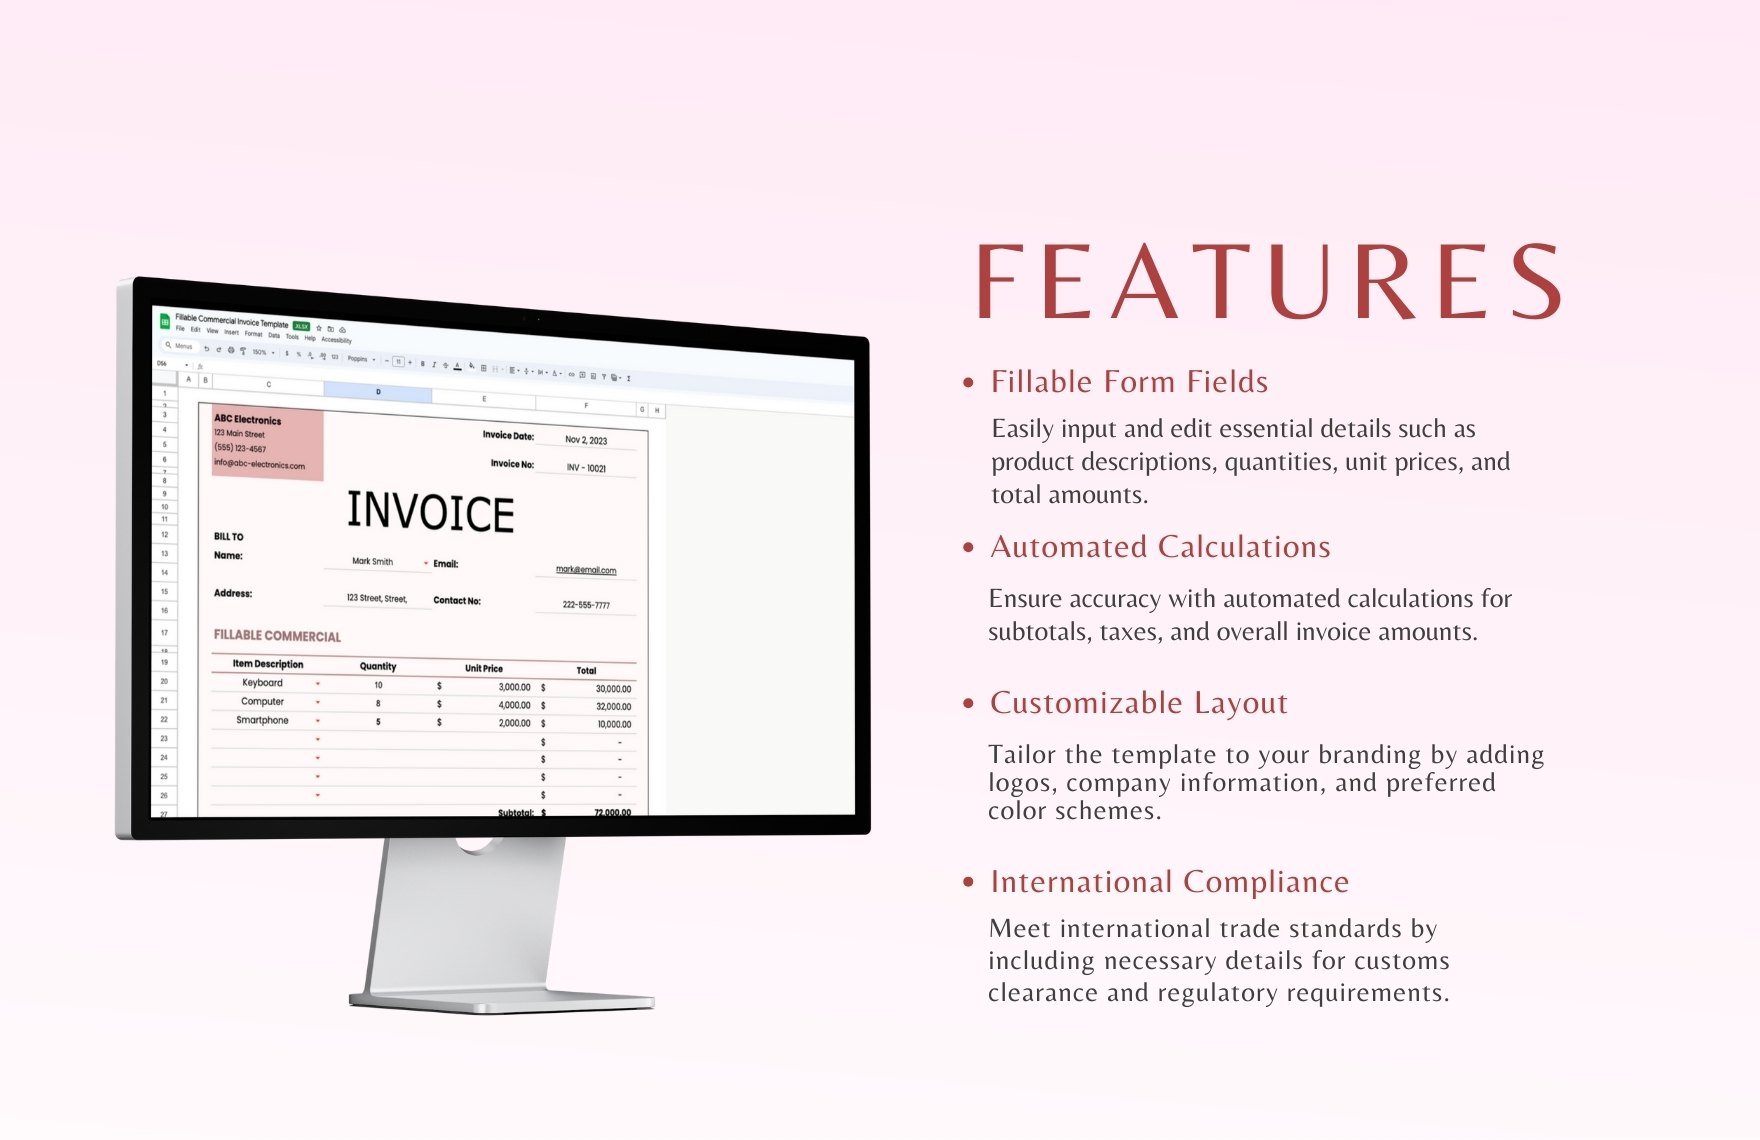 Fillable Commercial Invoice Template